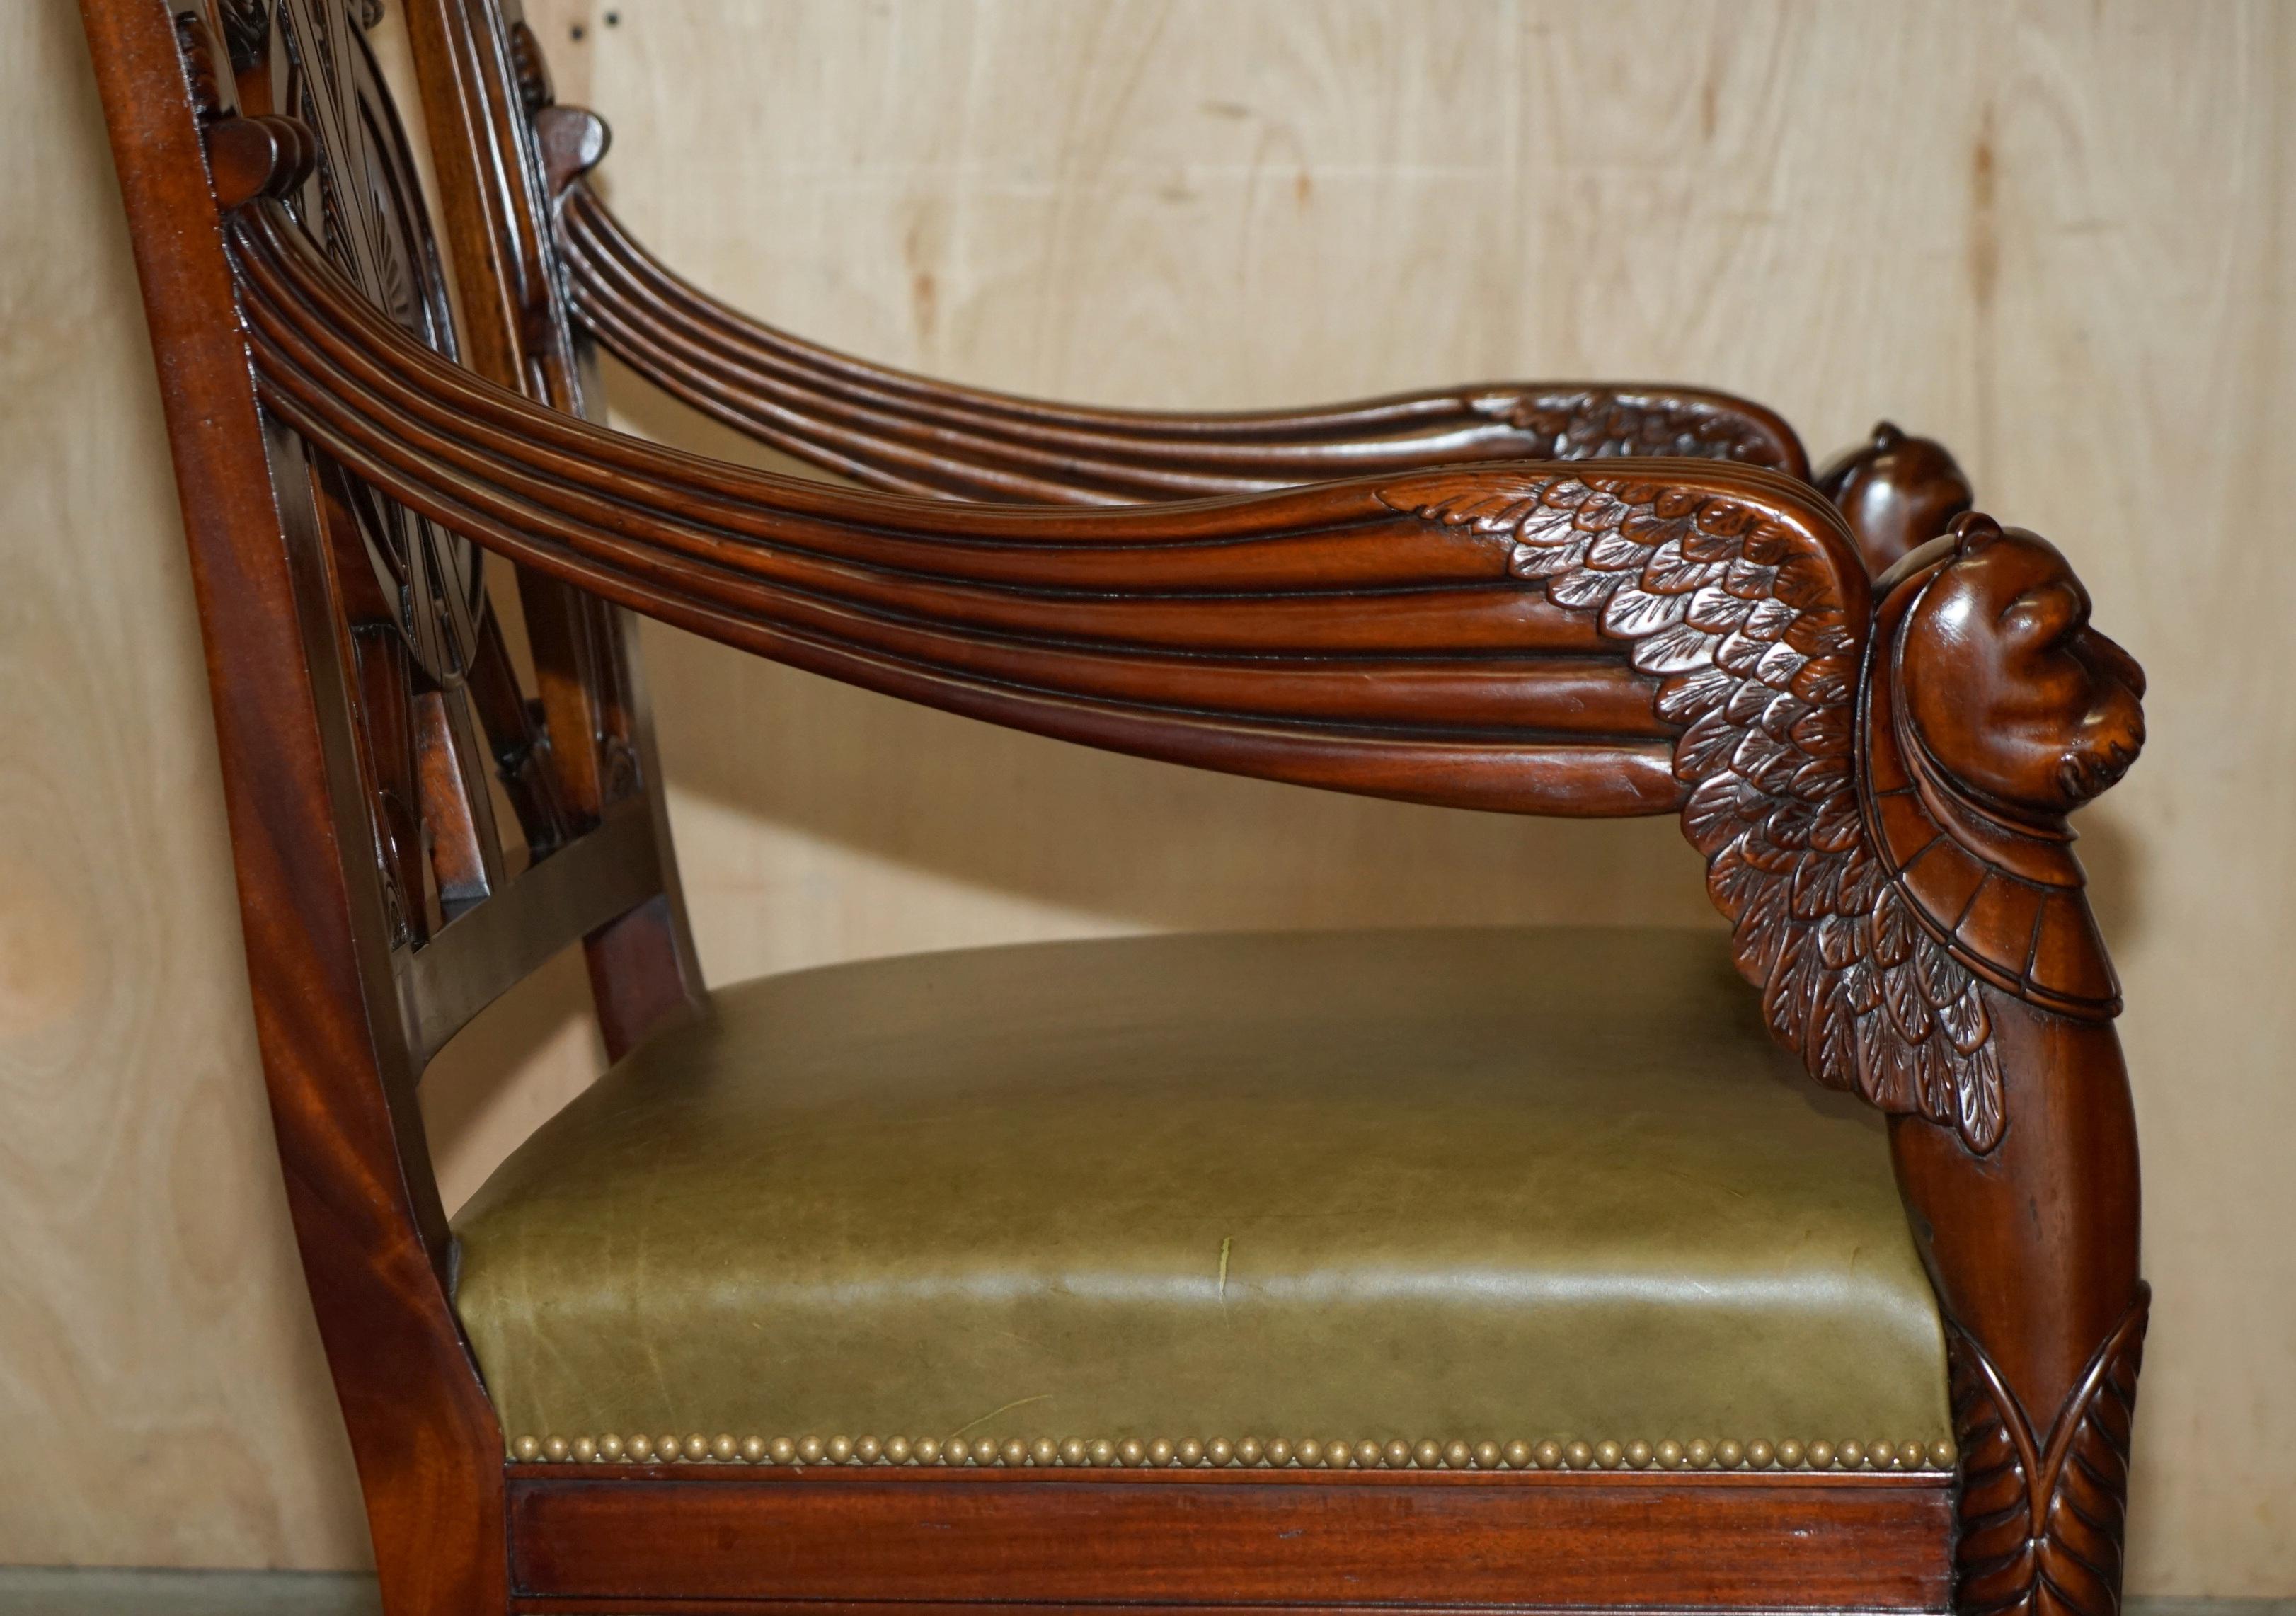 EXQUISITE PAIR OF HAND CARved HARDWOOD LiBRARY ARMCHAIRS LION GRIFFON WING ARMS im Angebot 10